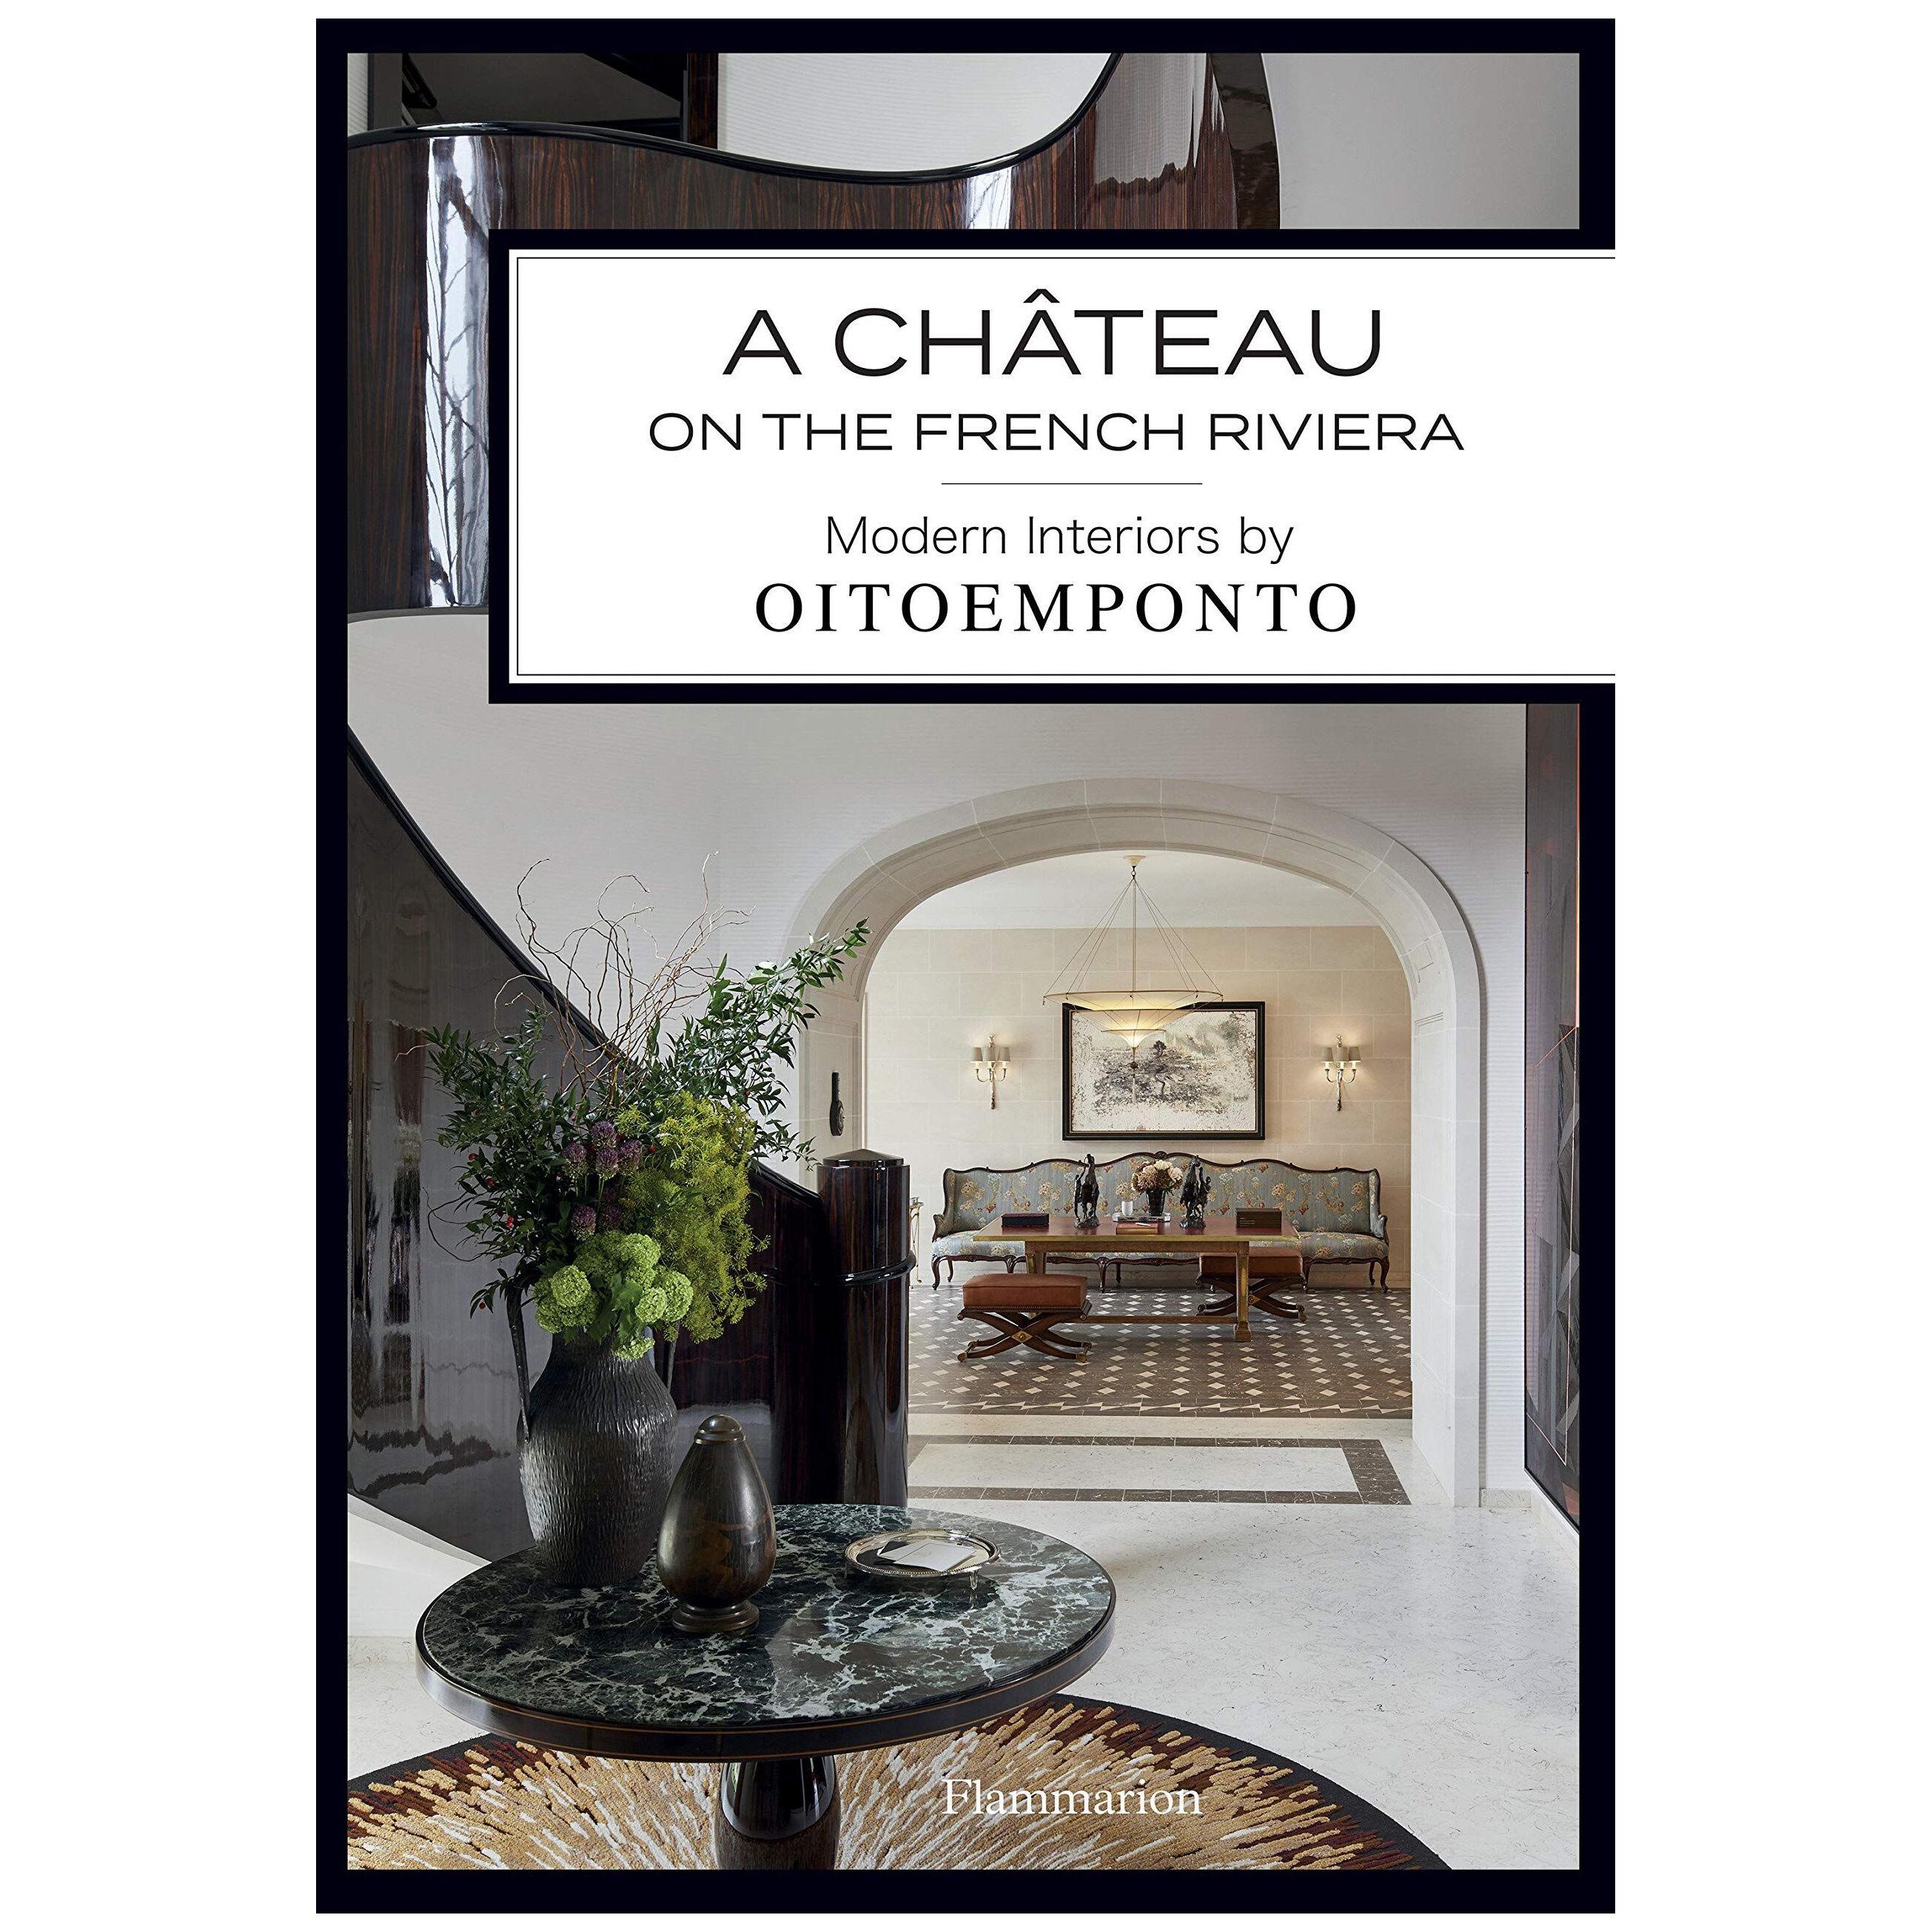 A Chateau on the French Riviera. Modern Interiors by Oitoemponto (Book)